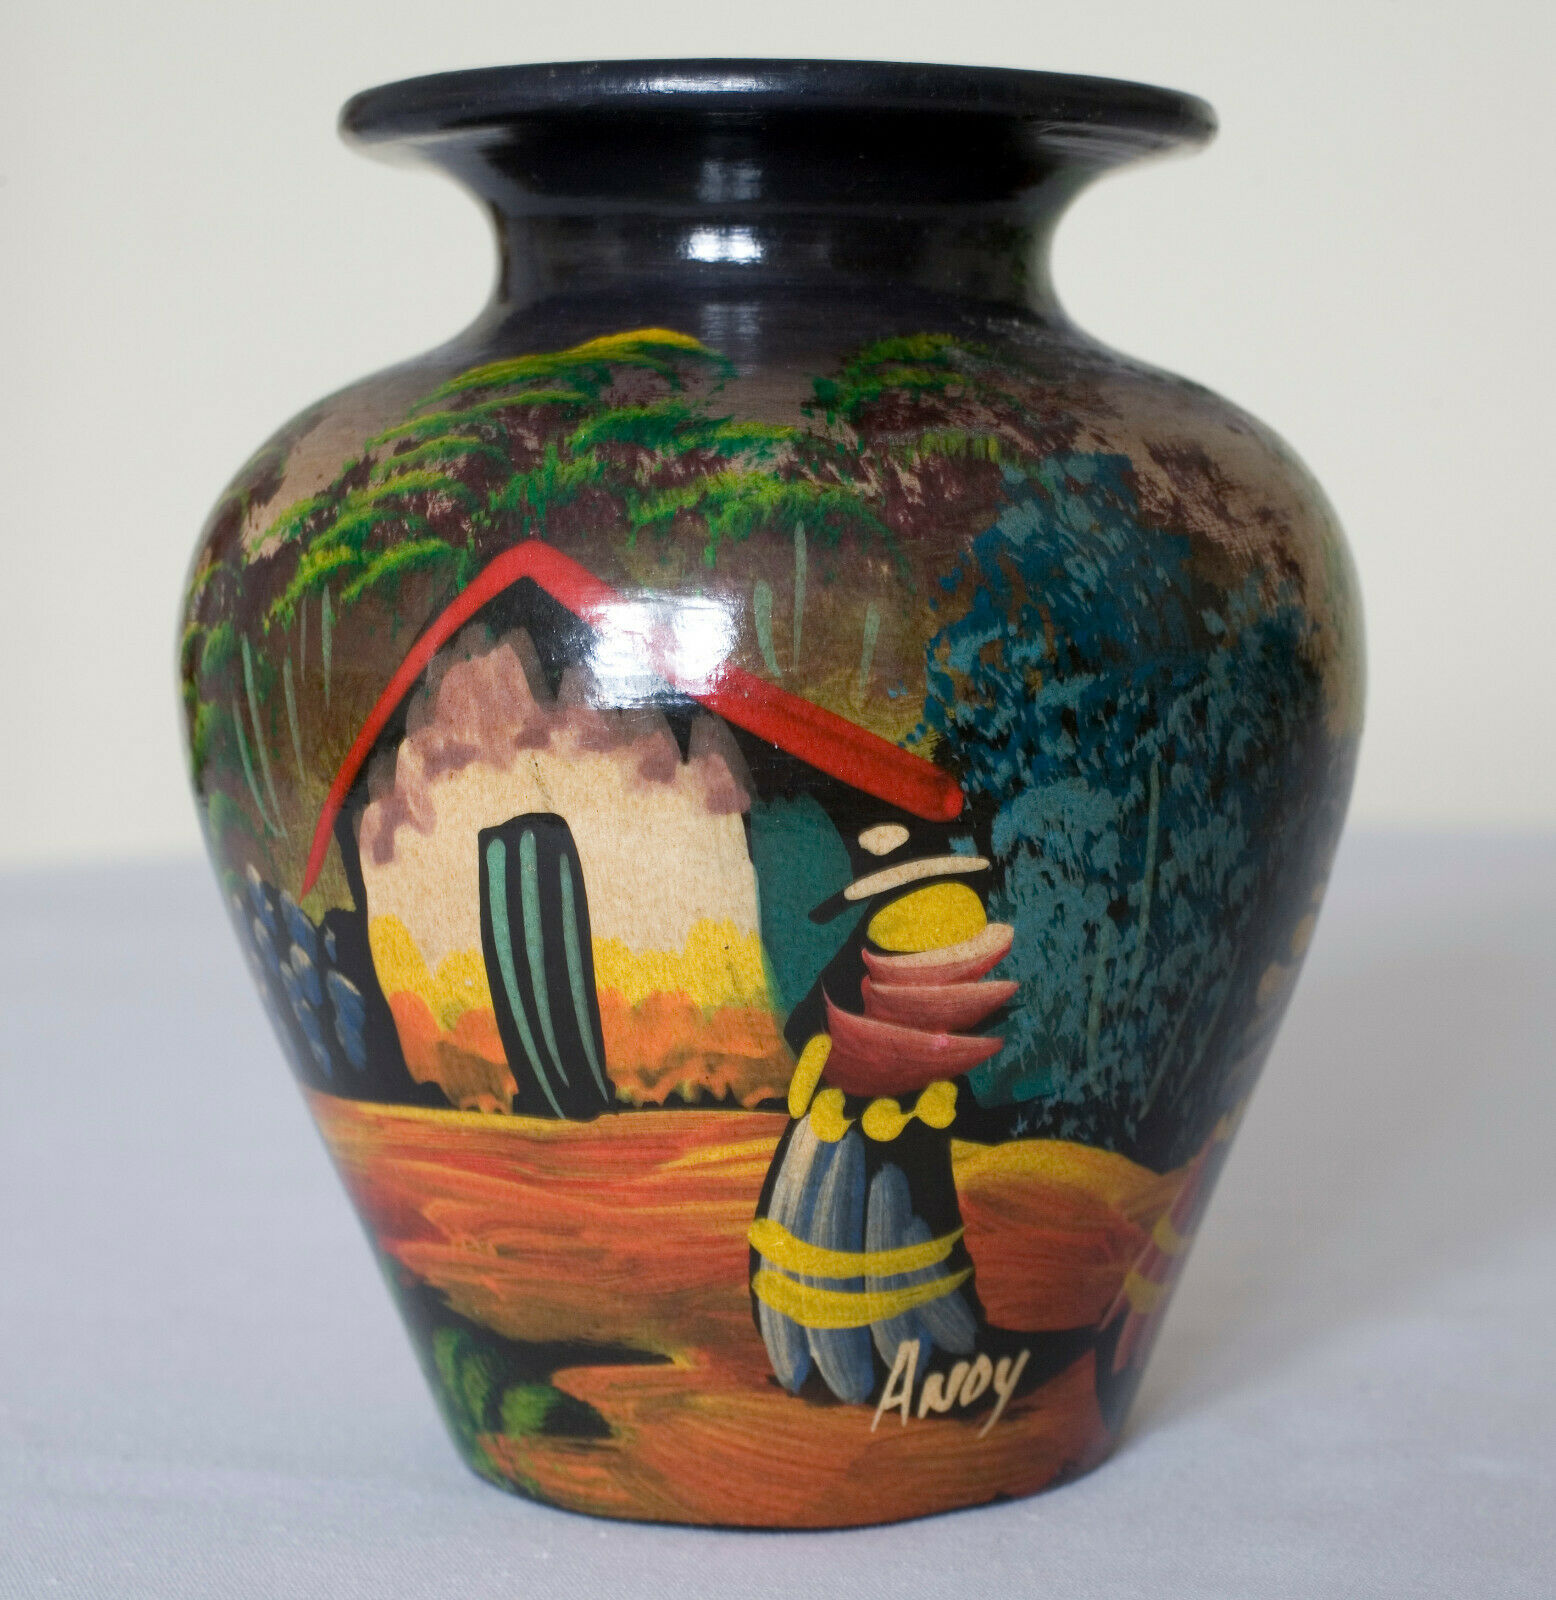 Hand-painted South American Primitive Pot / Vase - Signed " Andy "